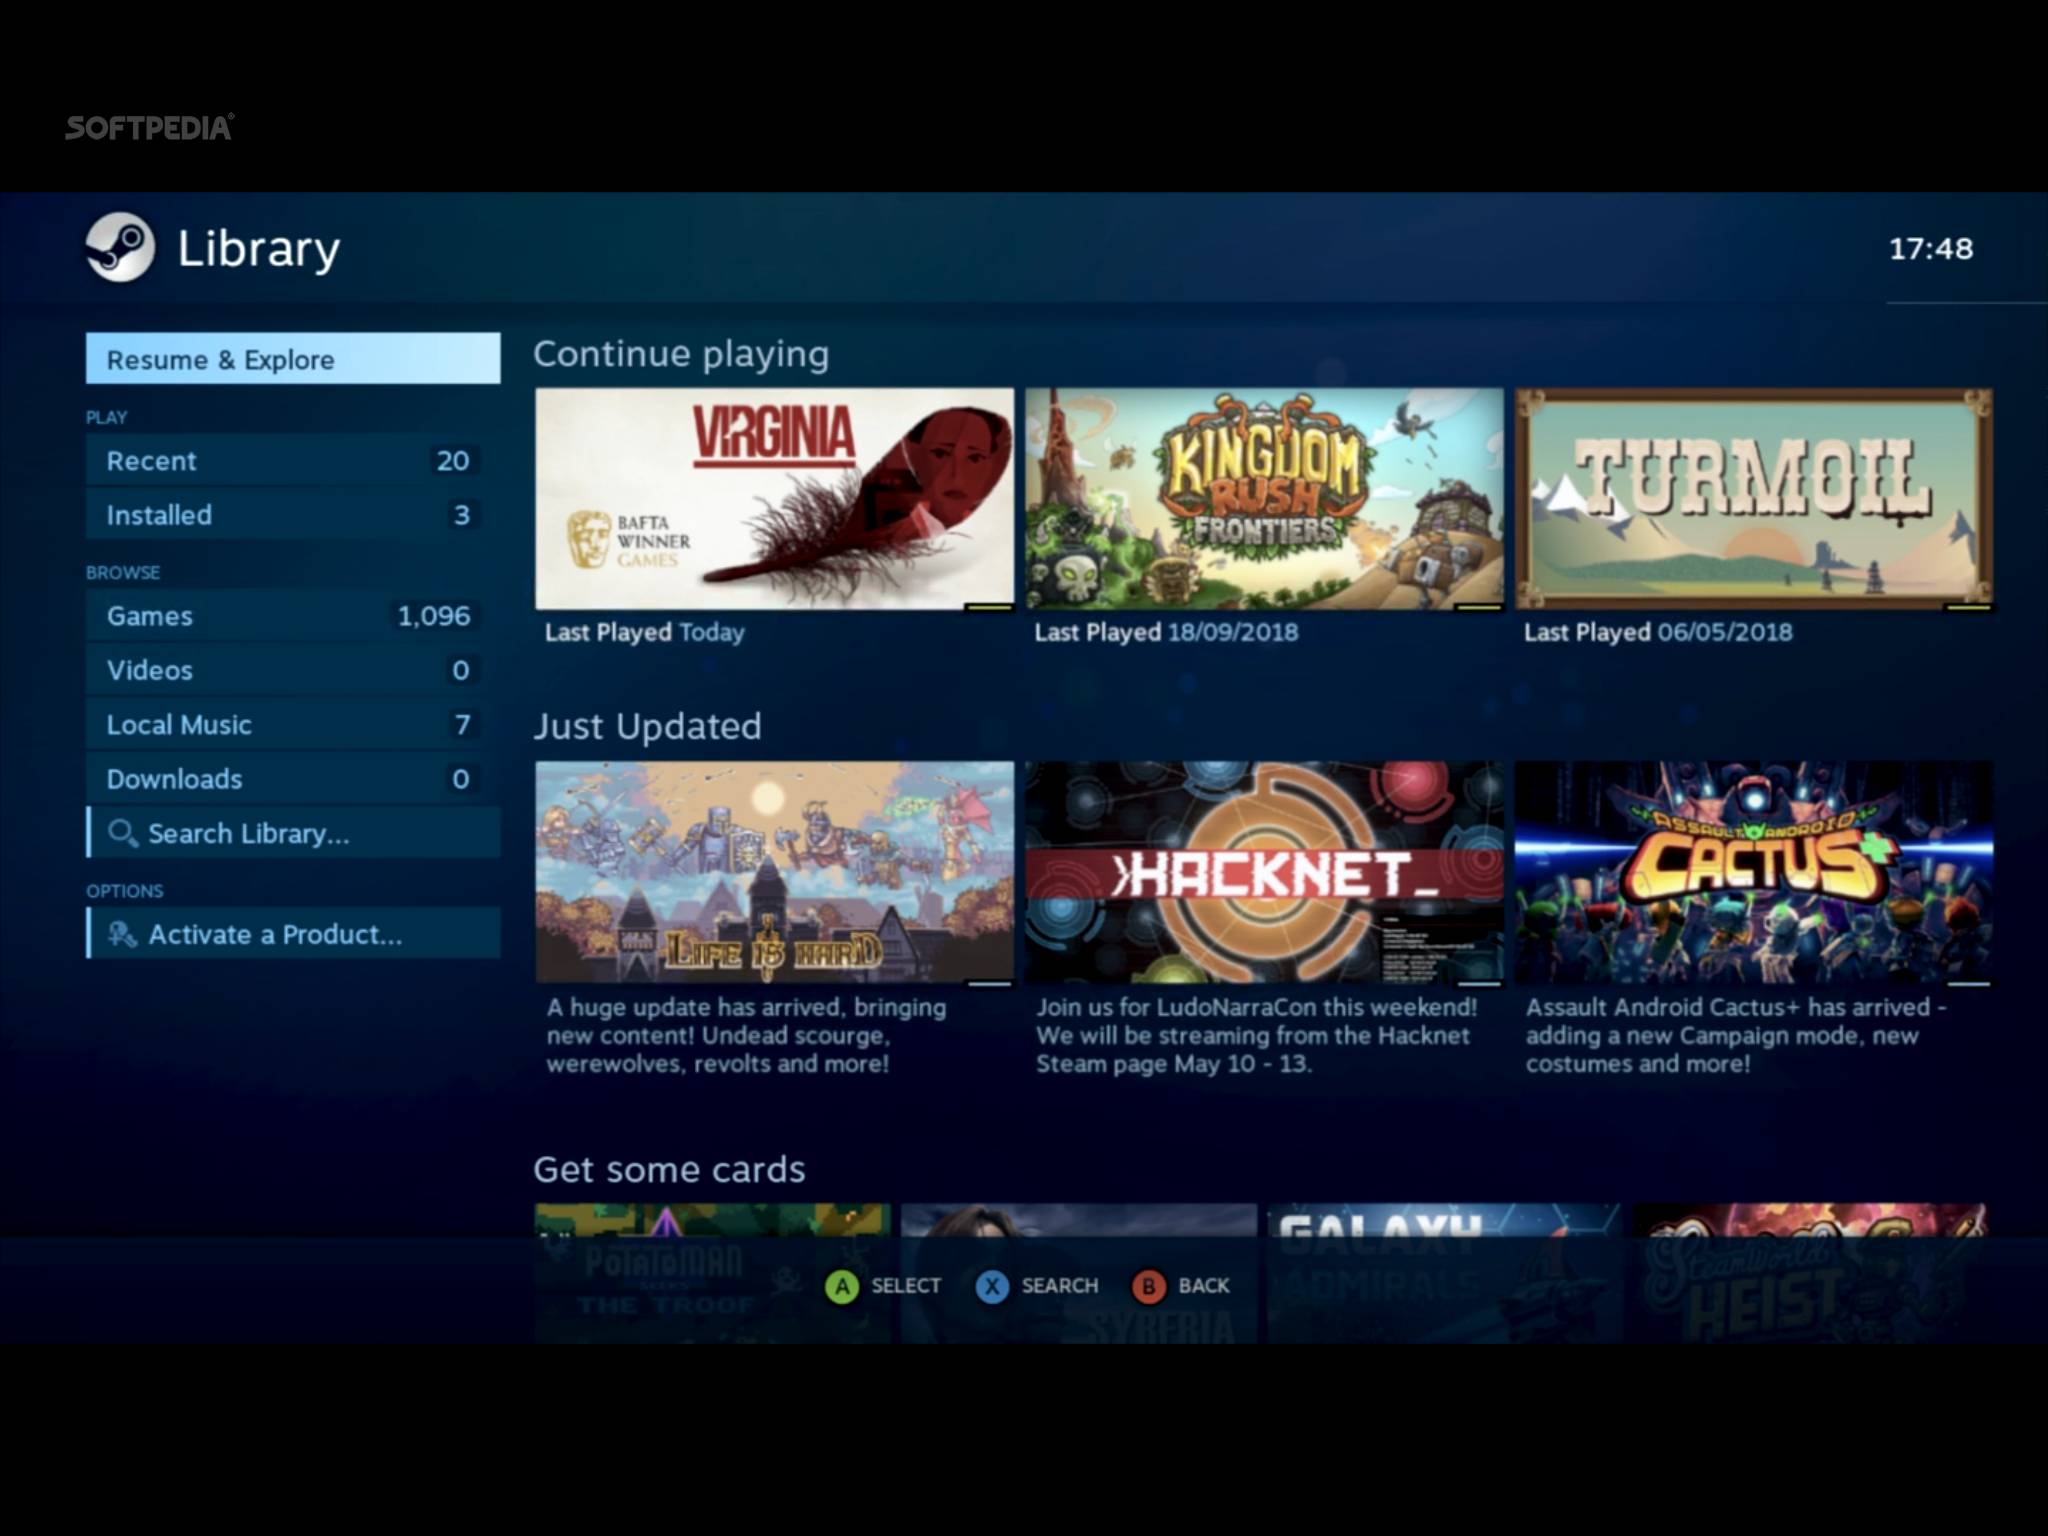 steam link for tv